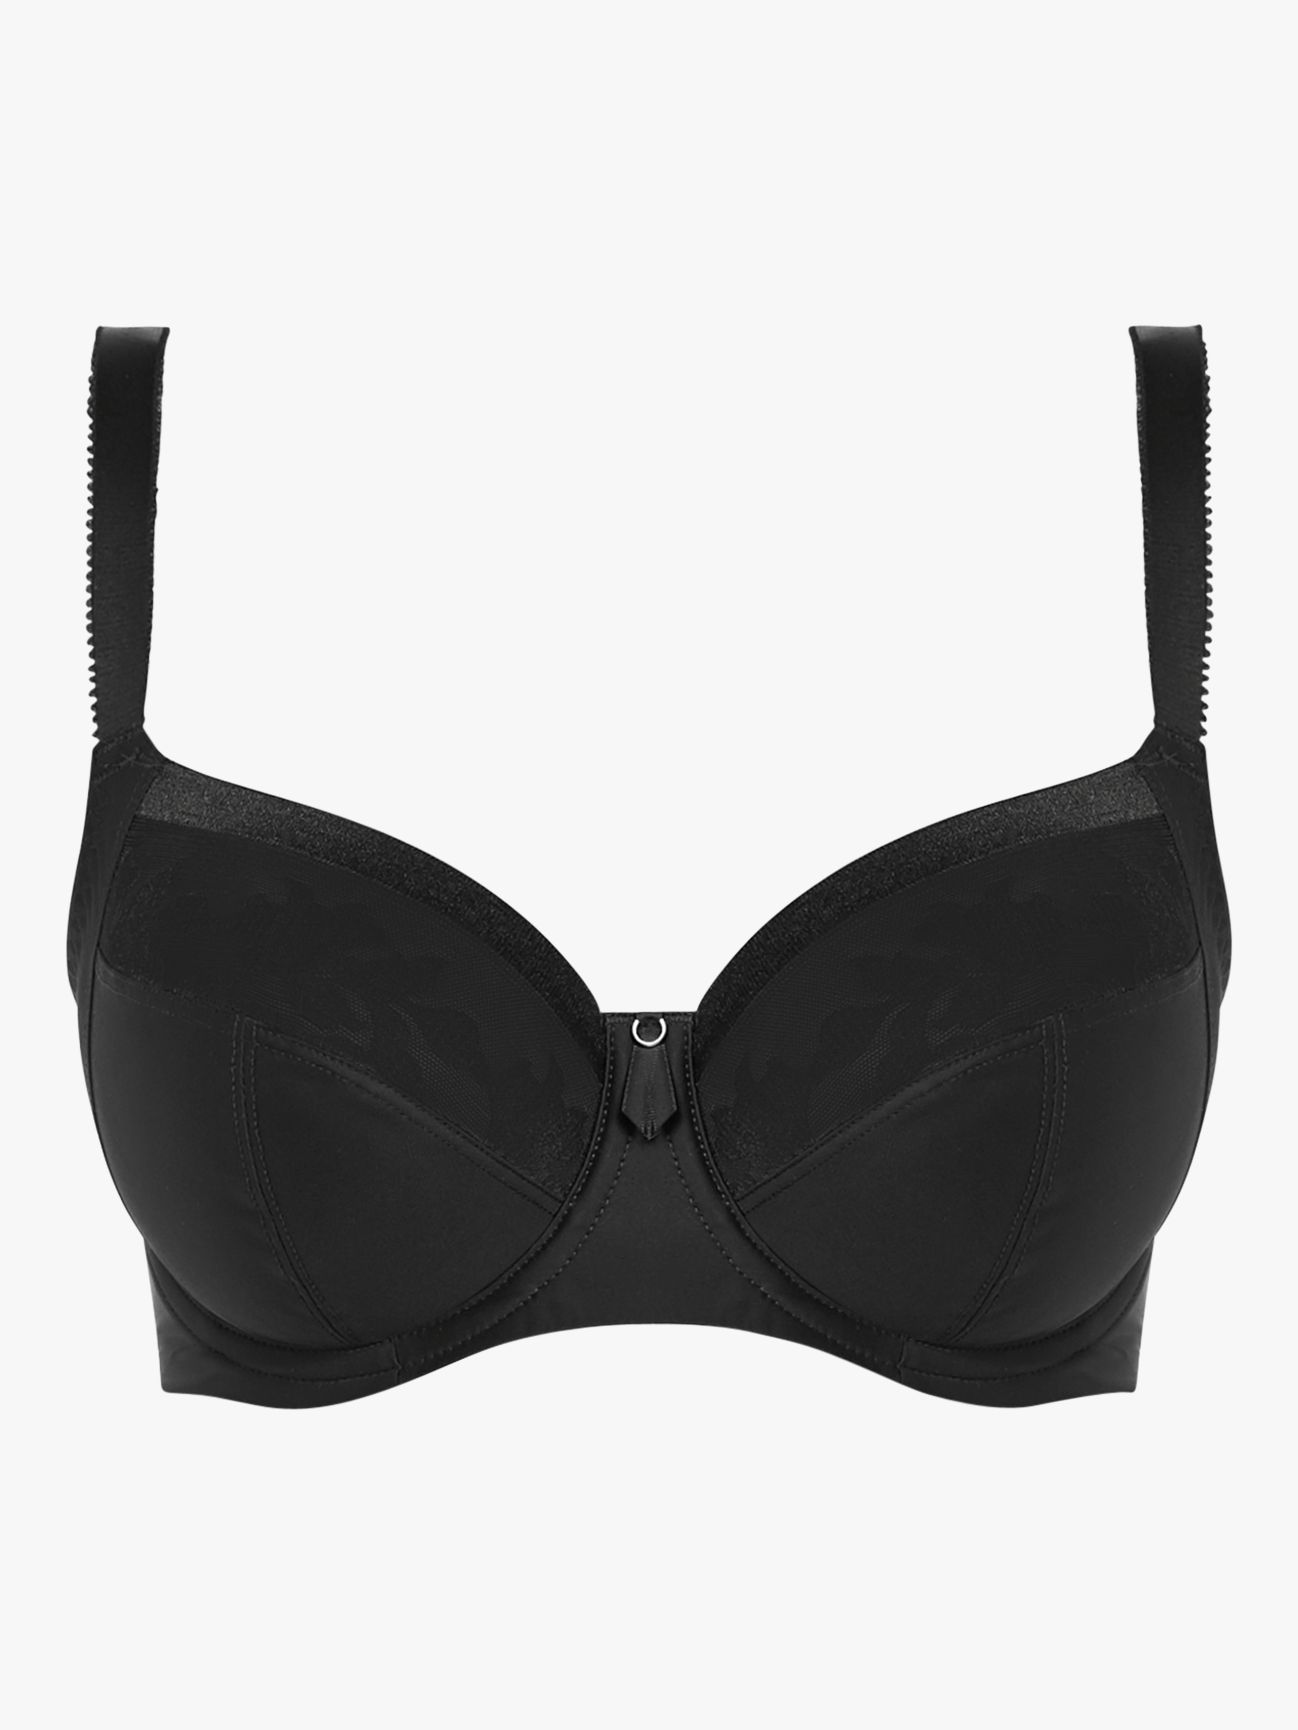 Buy Fantasie Illusion Underwired Side Support Balcony Bra Online at johnlewis.com